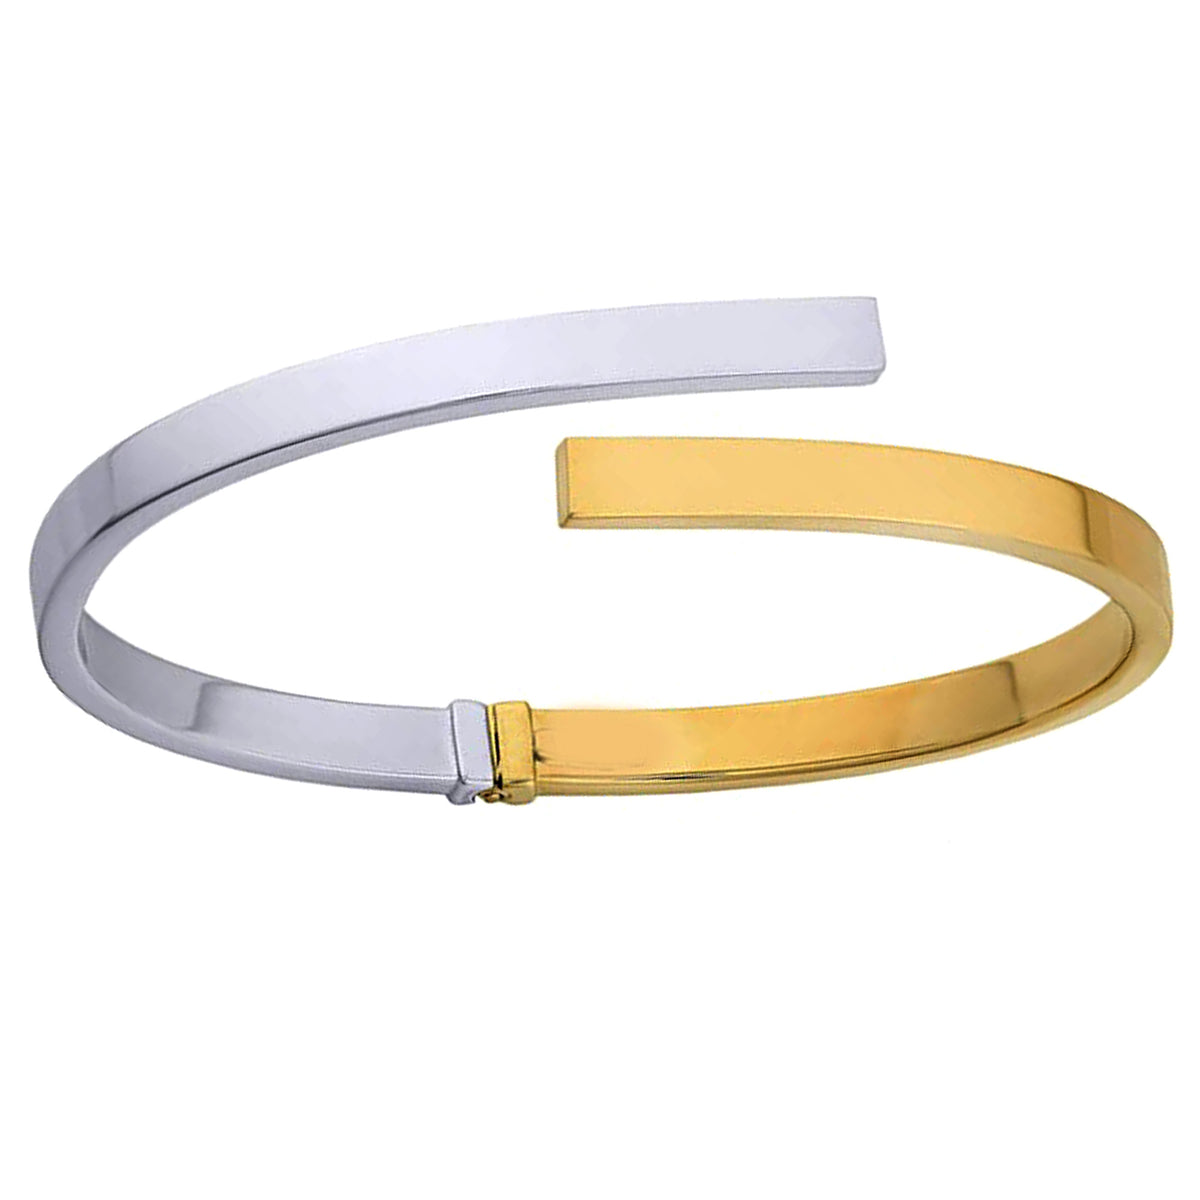 10k Yellow And White Gold Bypass Women's Bangle Bracelet, 7" fine designer jewelry for men and women